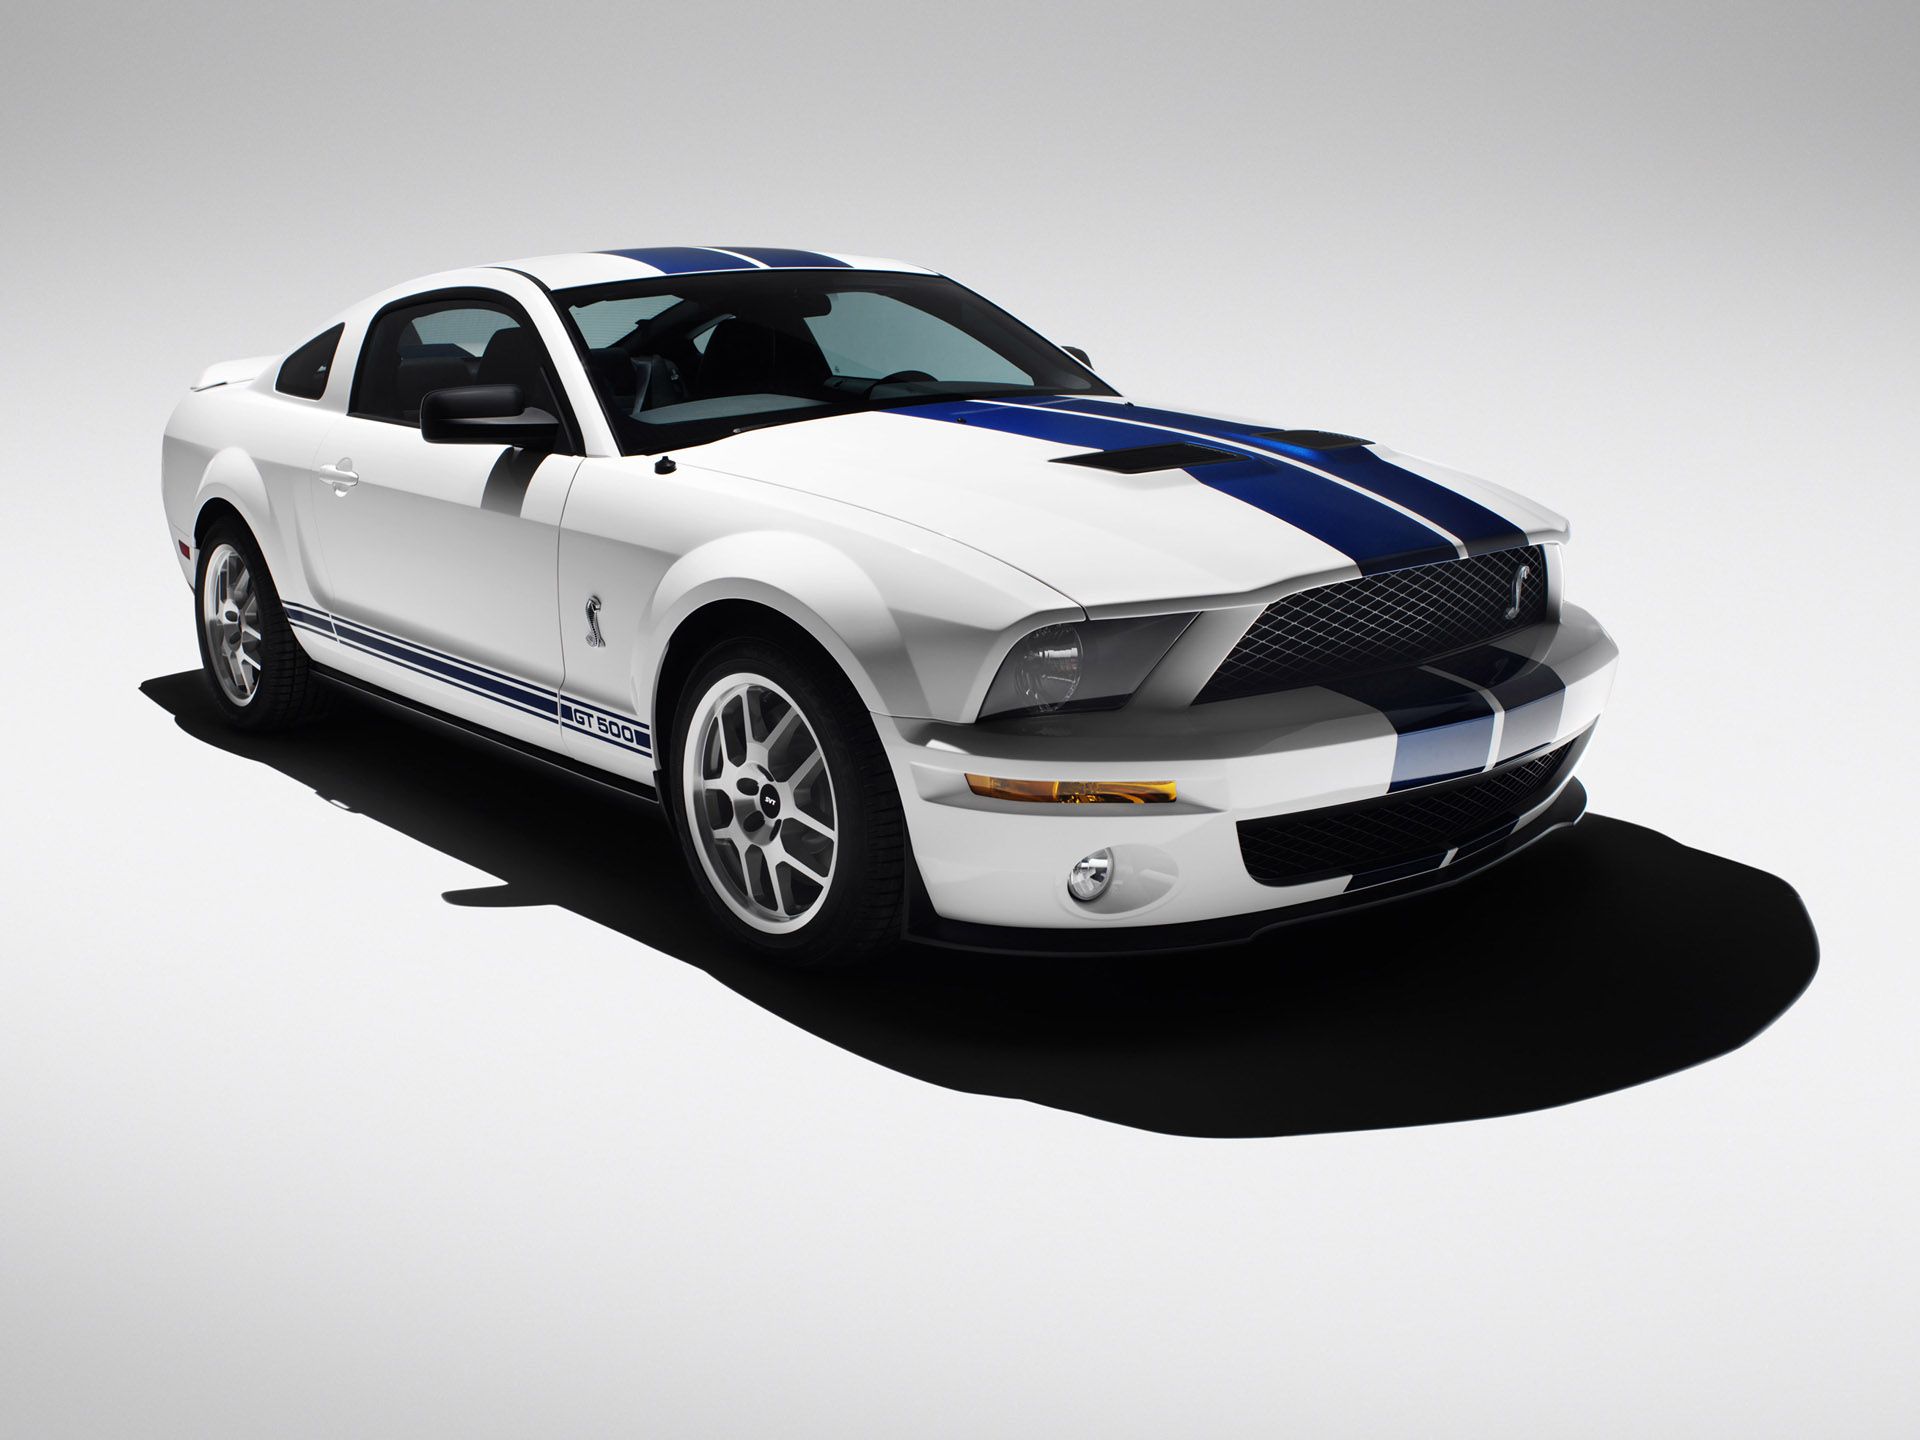 Gt500 4K wallpaper for your desktop or mobile screen free and easy to download